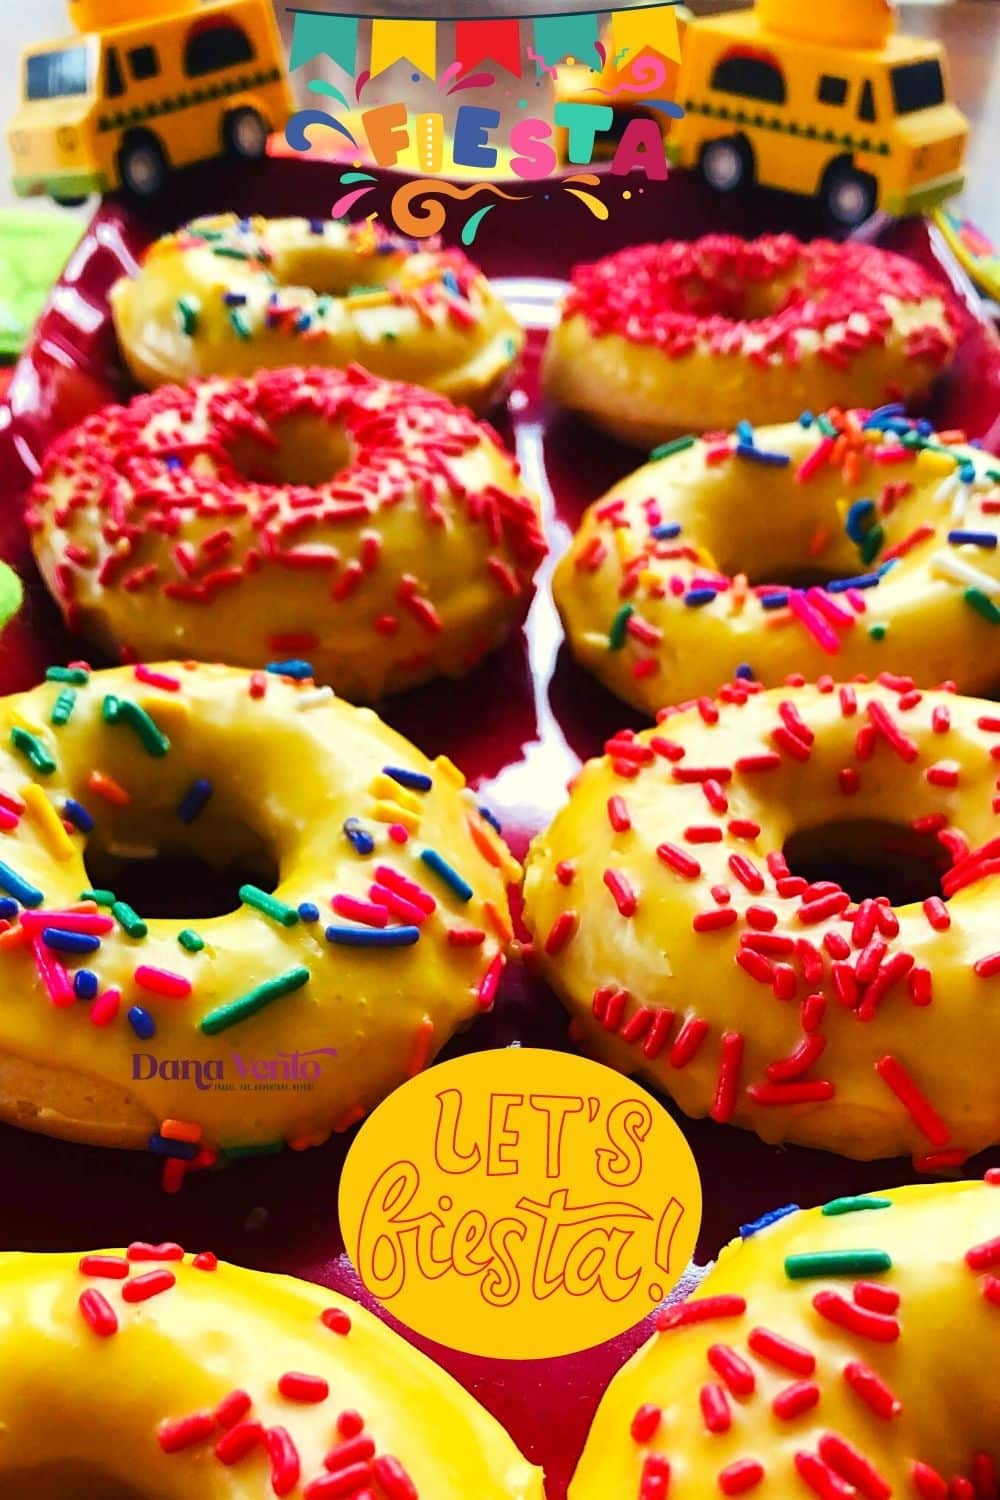 Sweet Mexican dessert donuts with sprinkles